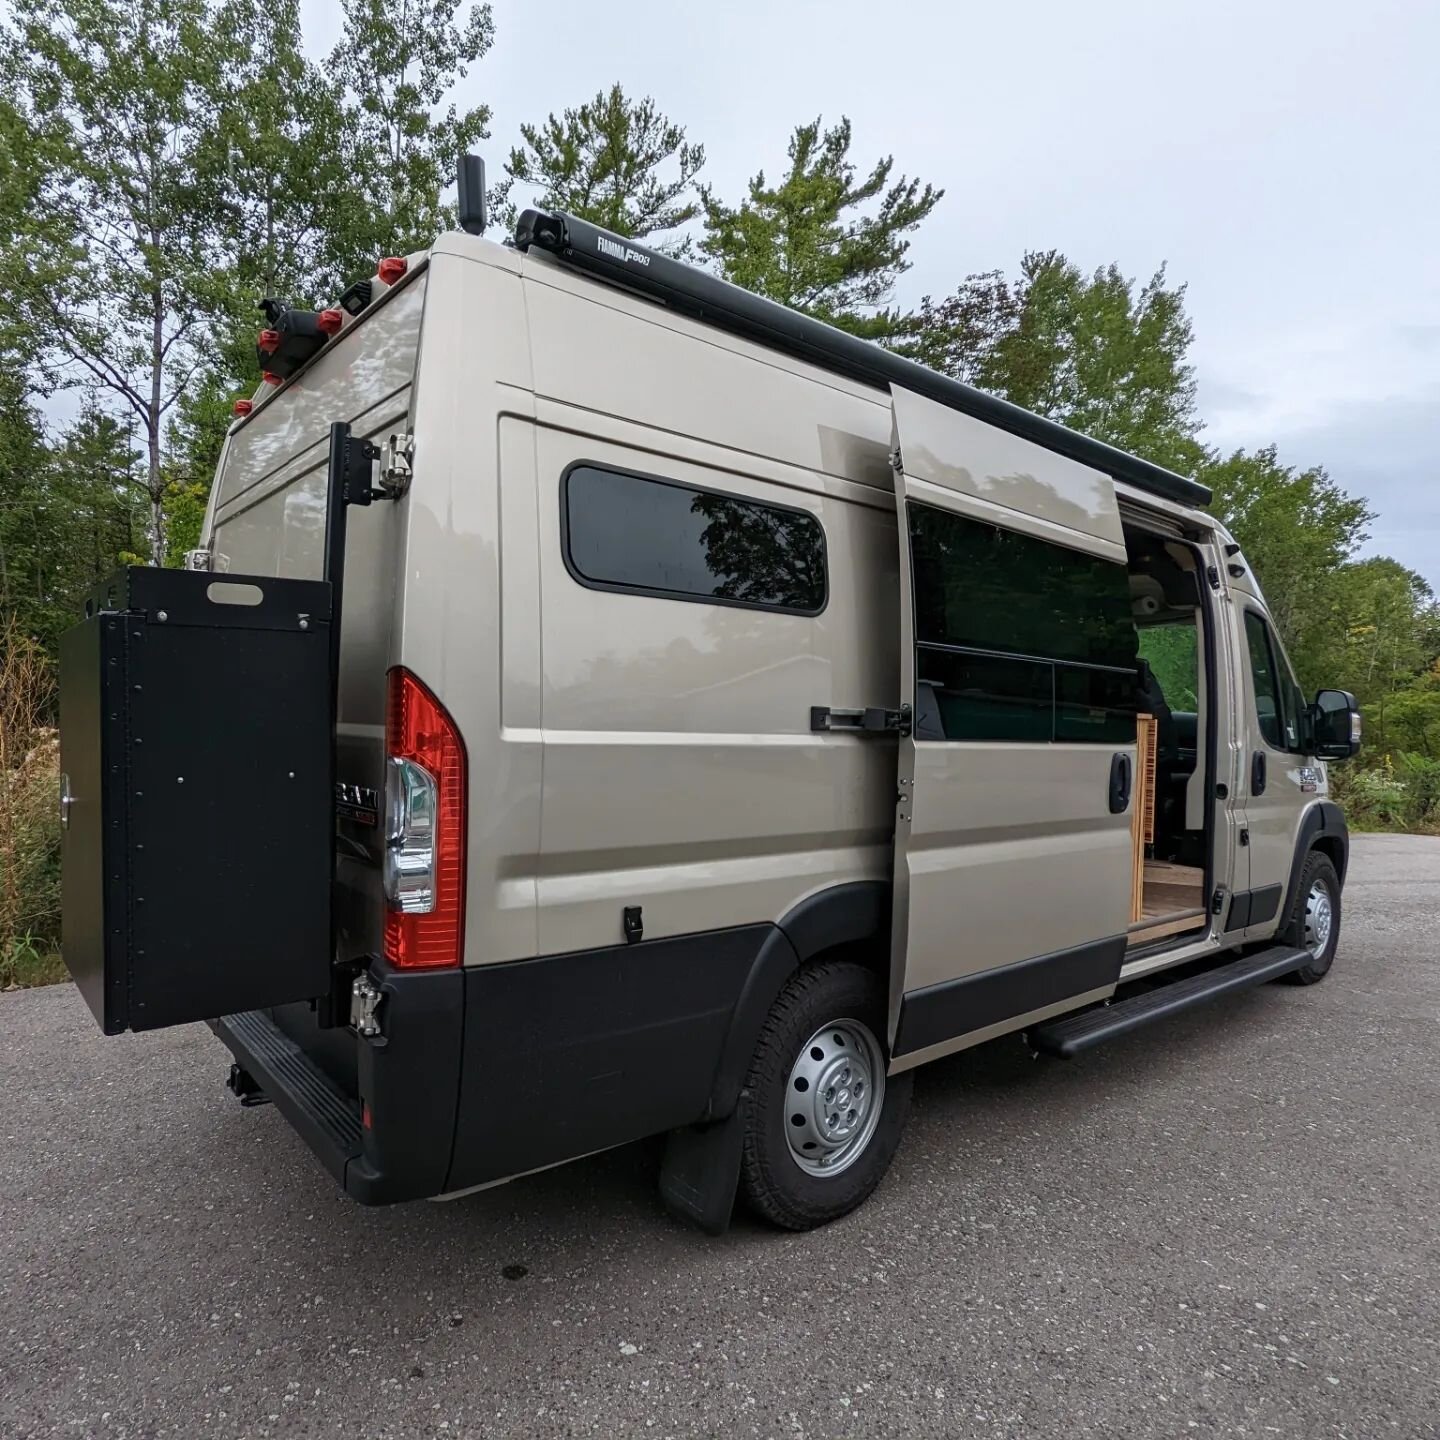 The owners of this custom Promaster are off road tripping 💚🚐 Excited to hear all about their first adVANture while we install a few more details, like completing the indoor shower. 
.
.
.
.
.
#rayoutfitted #vanbuild #vanlifecanada #vanbuilds #vanbu